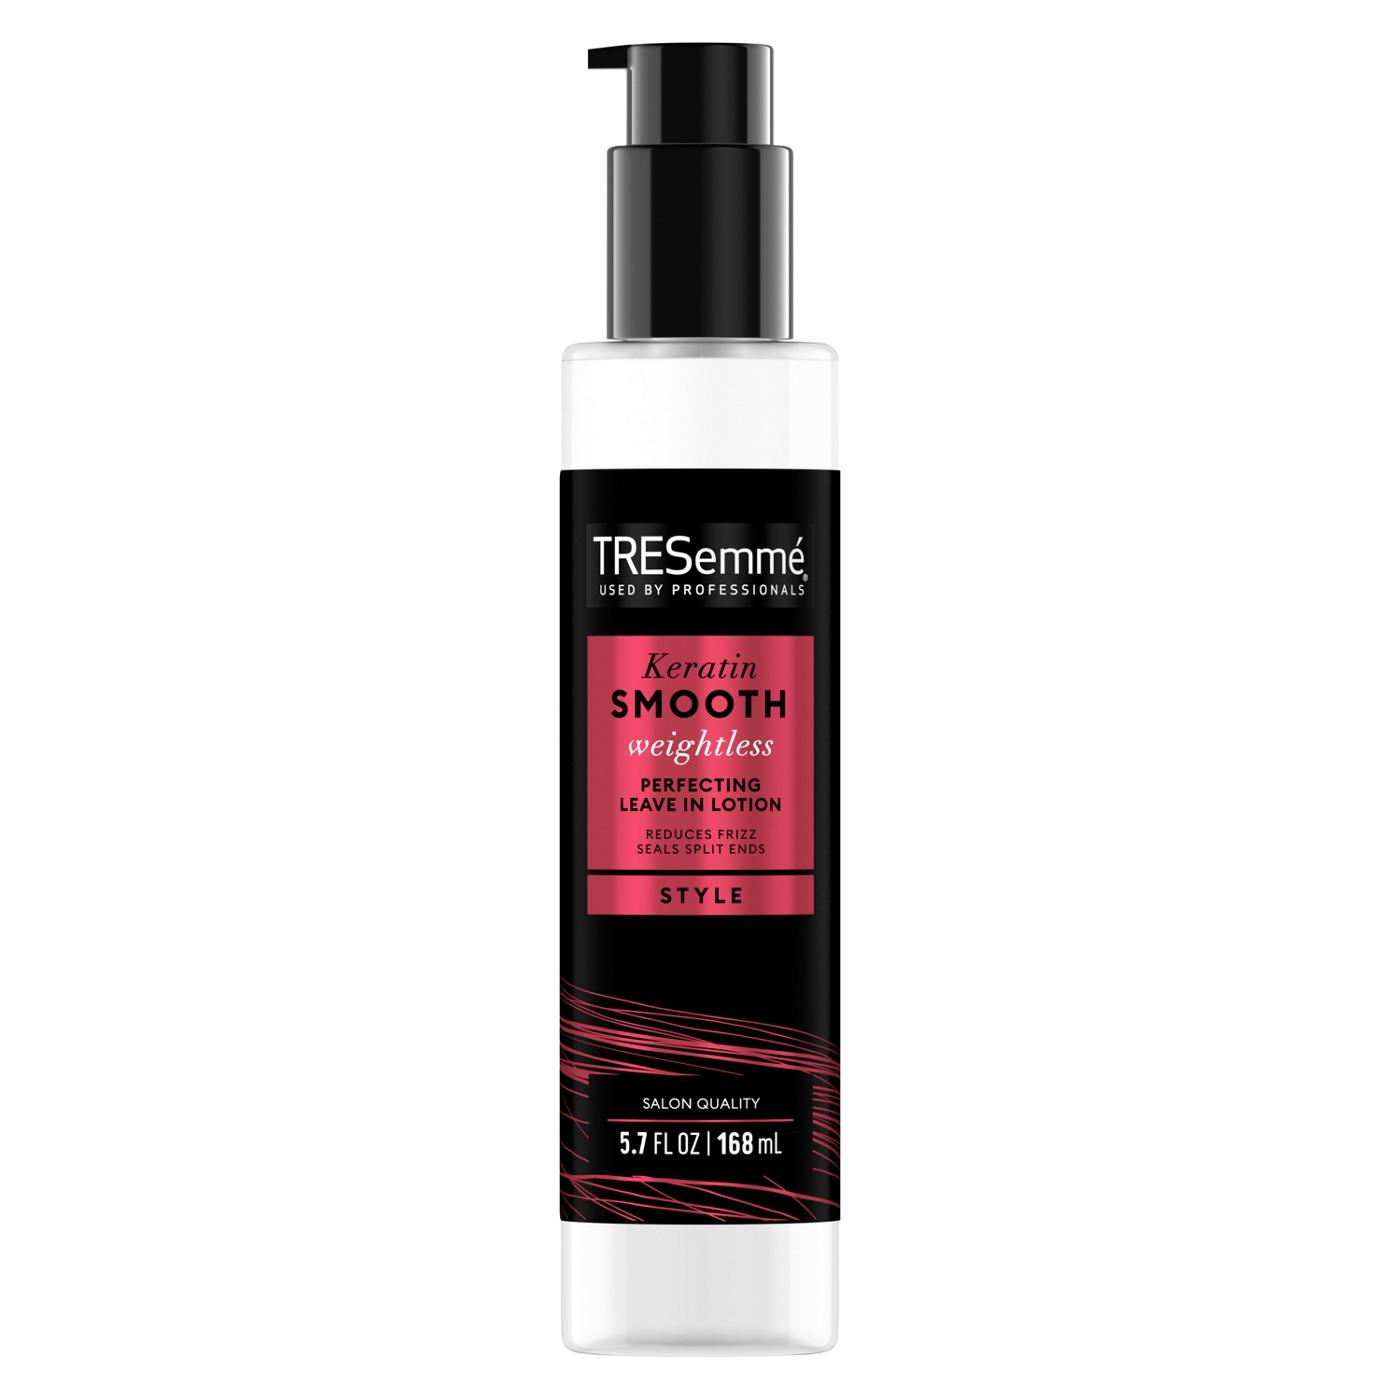 TRESemmé  Keratin Smooth Leave in Lotion; image 1 of 3